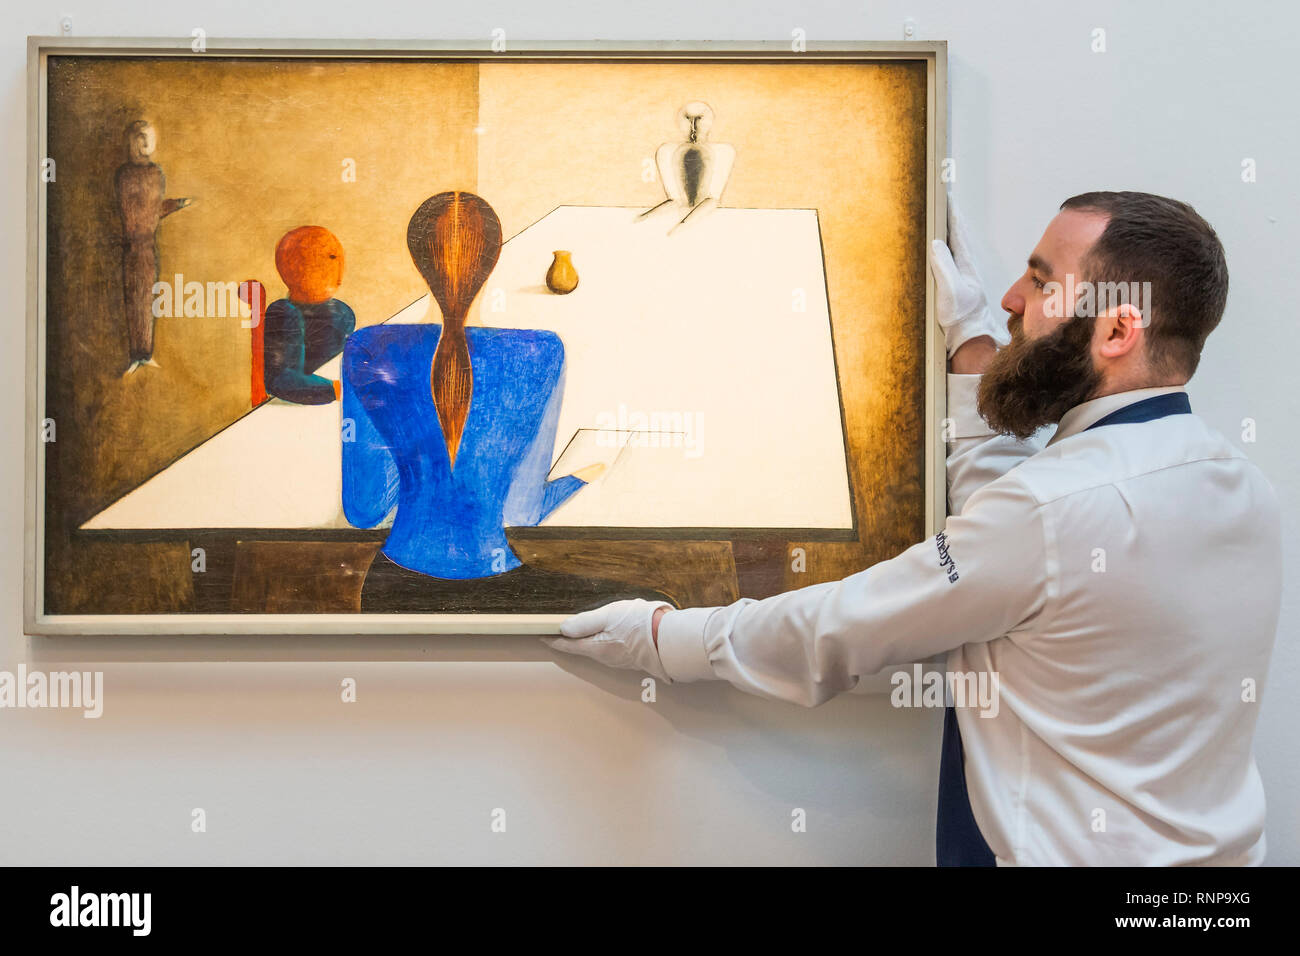 London, UK. 20th Feb, 2019. Tischgesellshaft, 1923, by Oskar Schlemmer, est £1-1.5m - A preview aahead of the Impressionist, Modern & Surrealist Art sales at Sotheby's New Bond Street, London. Credit: Guy Bell/Alamy Live News Stock Photo